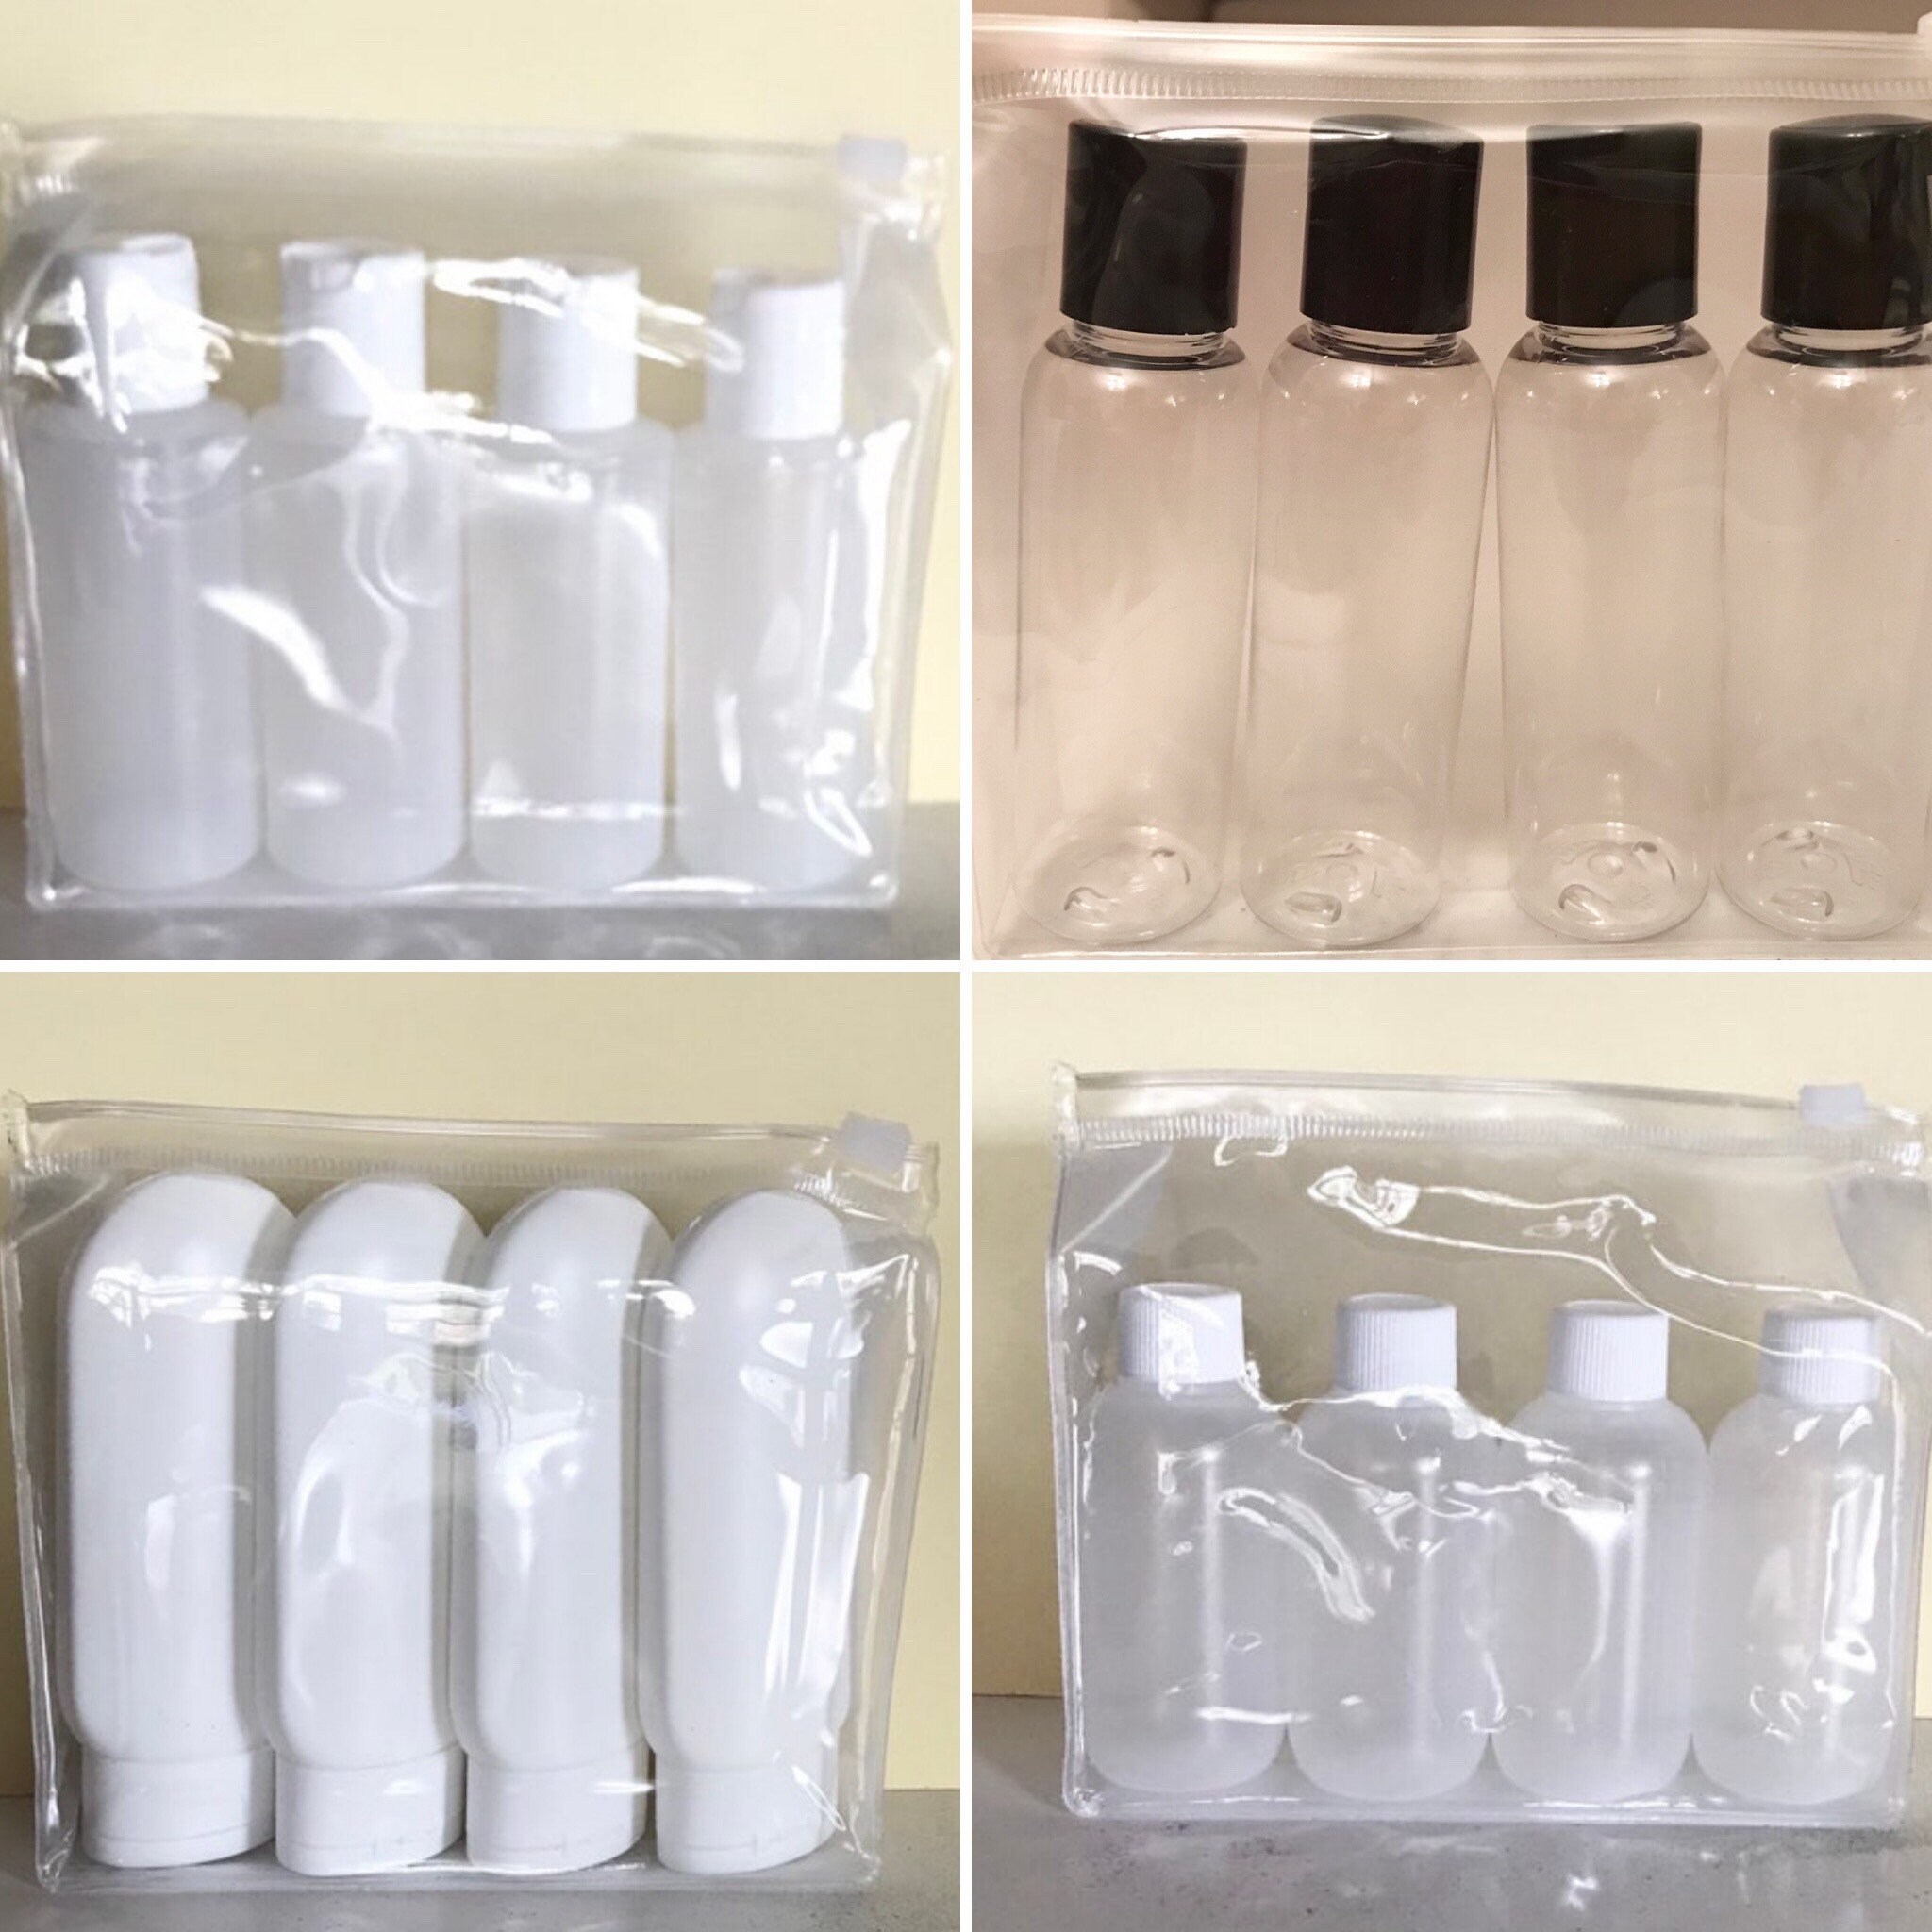 Bandaid Storage With Sliding Lid Ointment Storage Bandaids Box Band-aid Jar  Travel Containers Travel Cases Bathroom Storage Vanity Container 